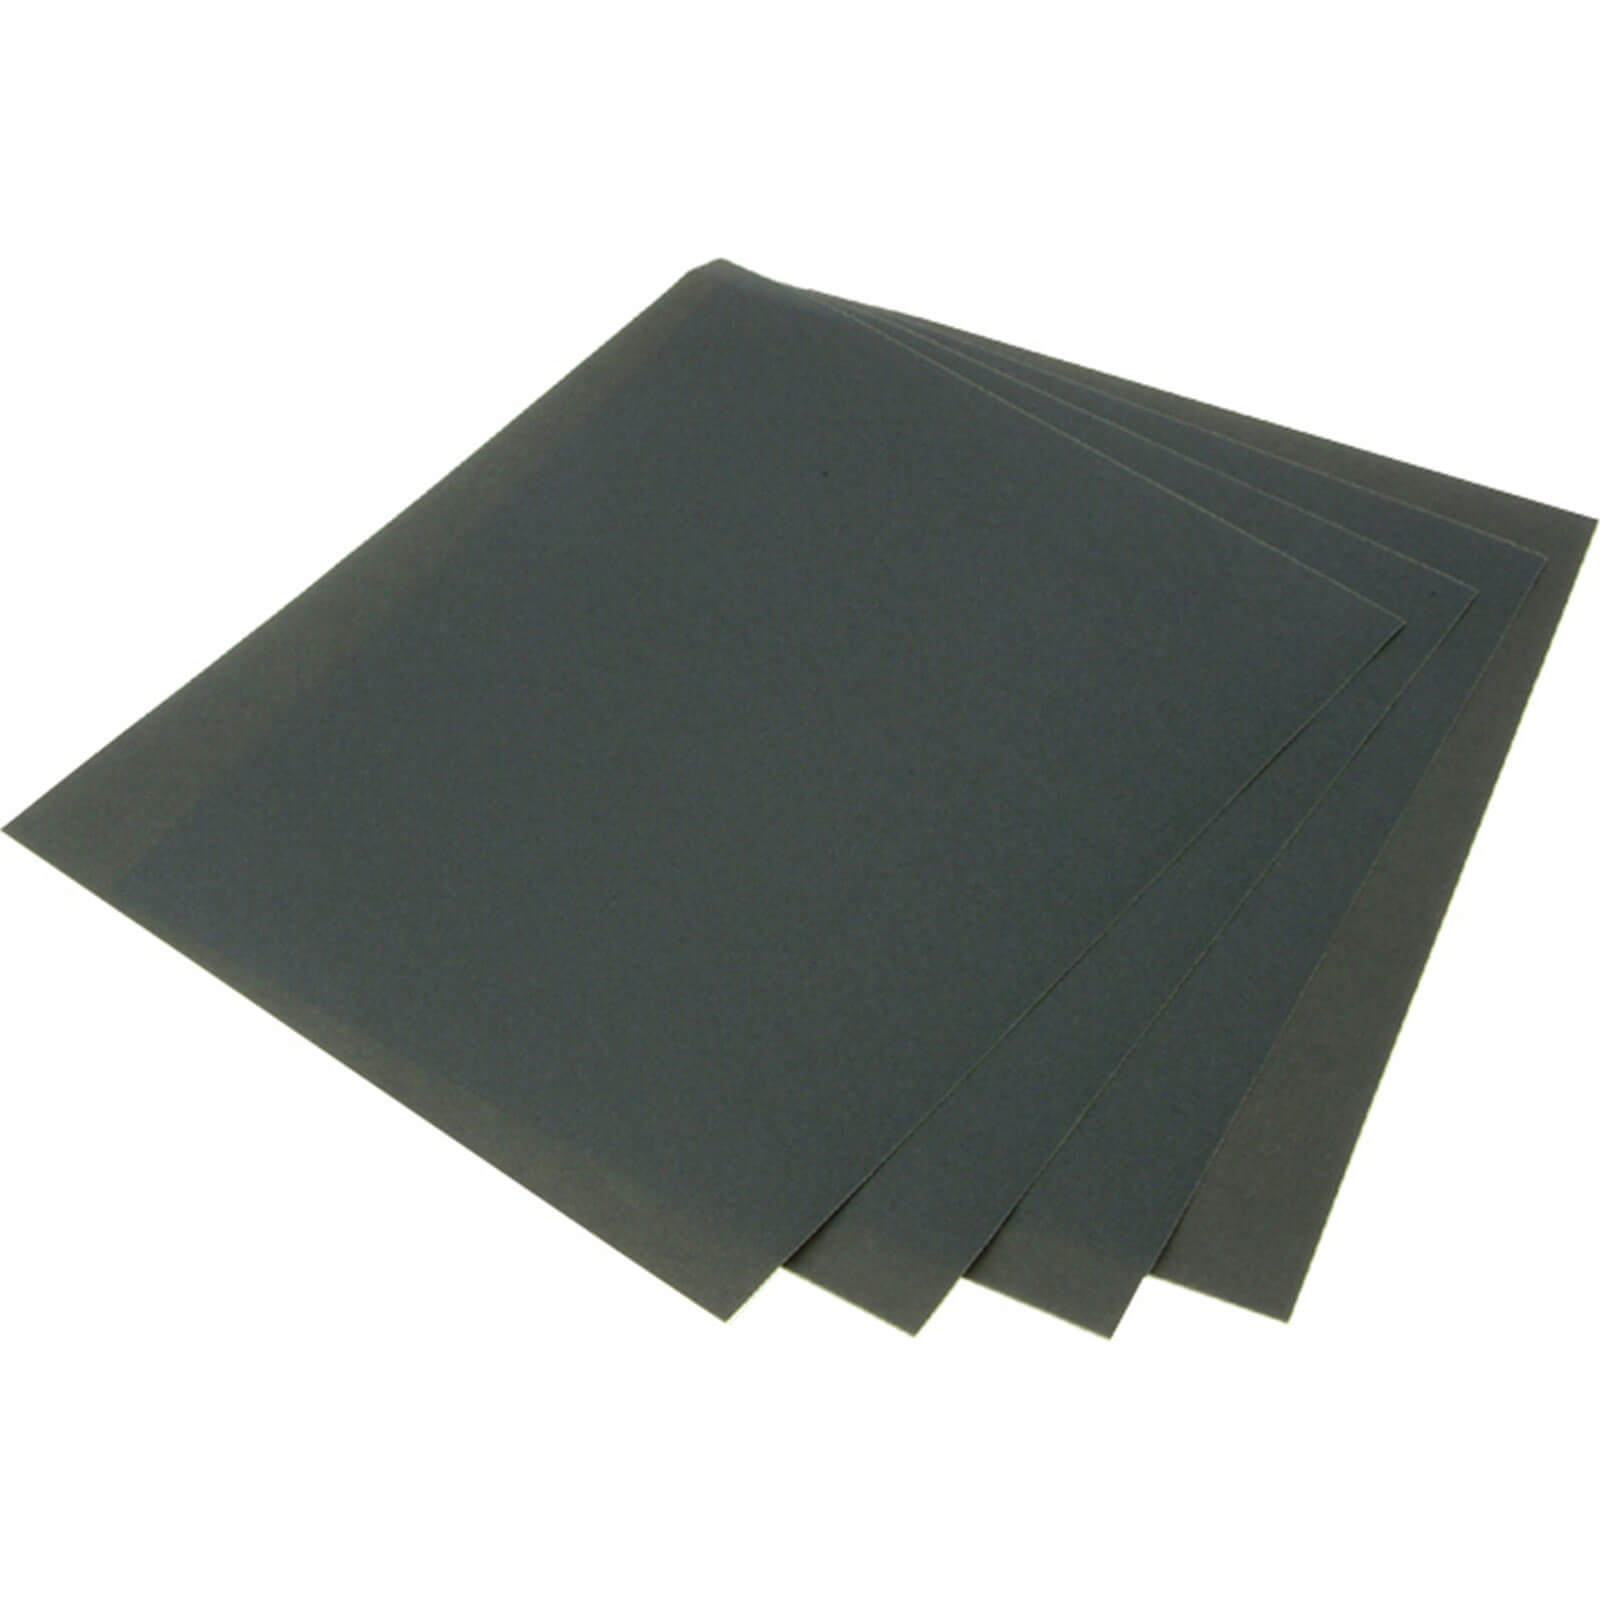 Image of Faithfull Wet and Dry Paper Sheets 230 x 280mm 400g Pack of 25